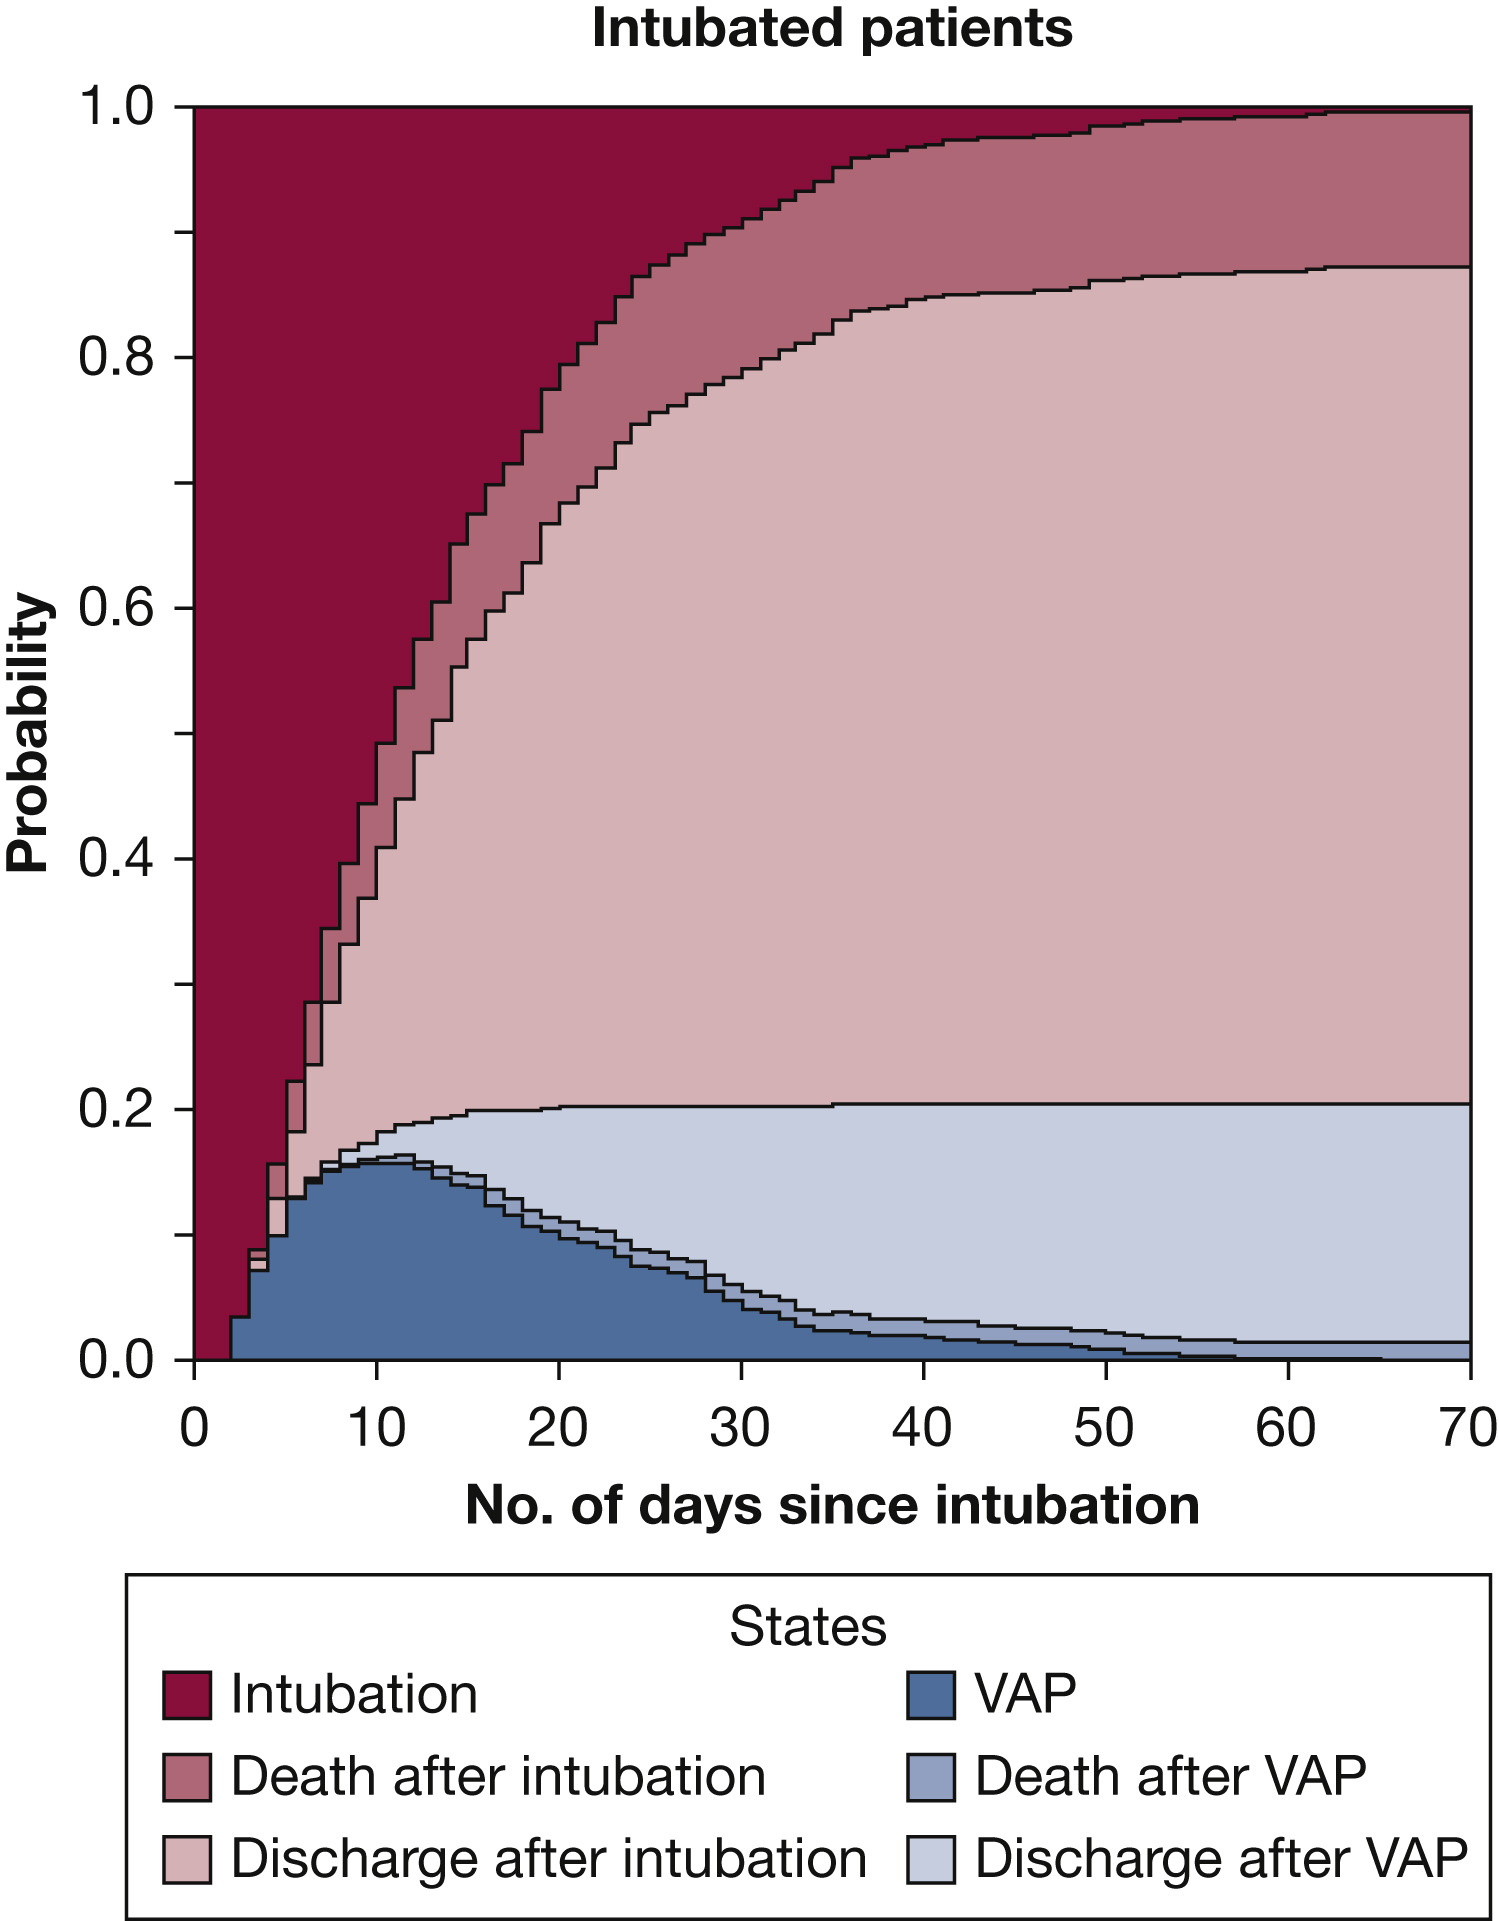 Overall transition probabilities of patients who had undergone intubation.